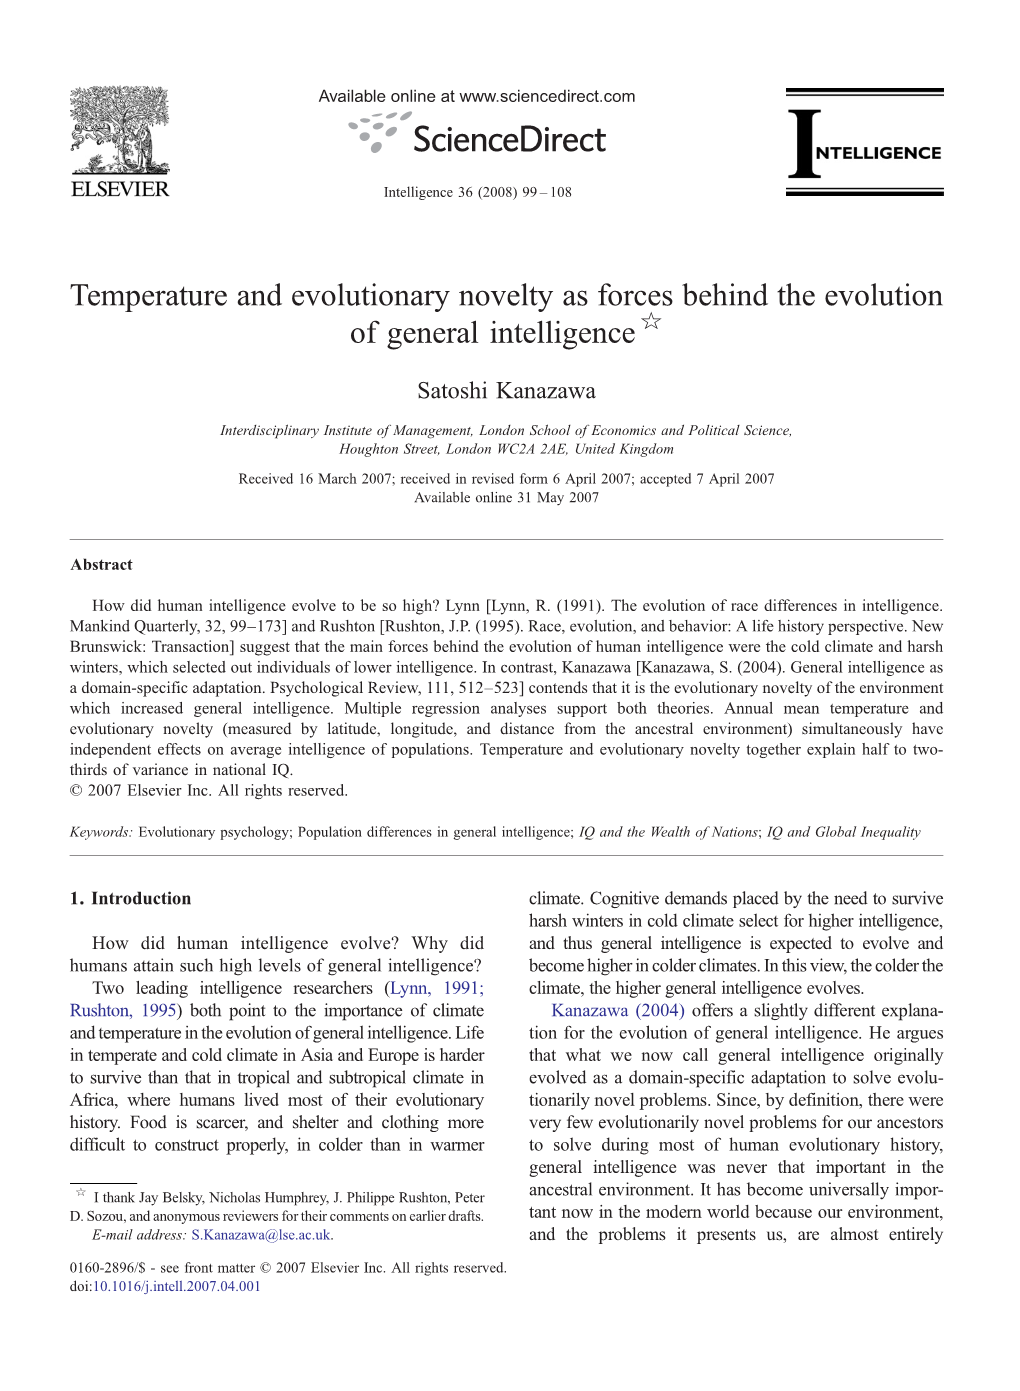 Temperature and Evolutionary Novelty As Forces Behind the Evolution of General Intelligence ☆